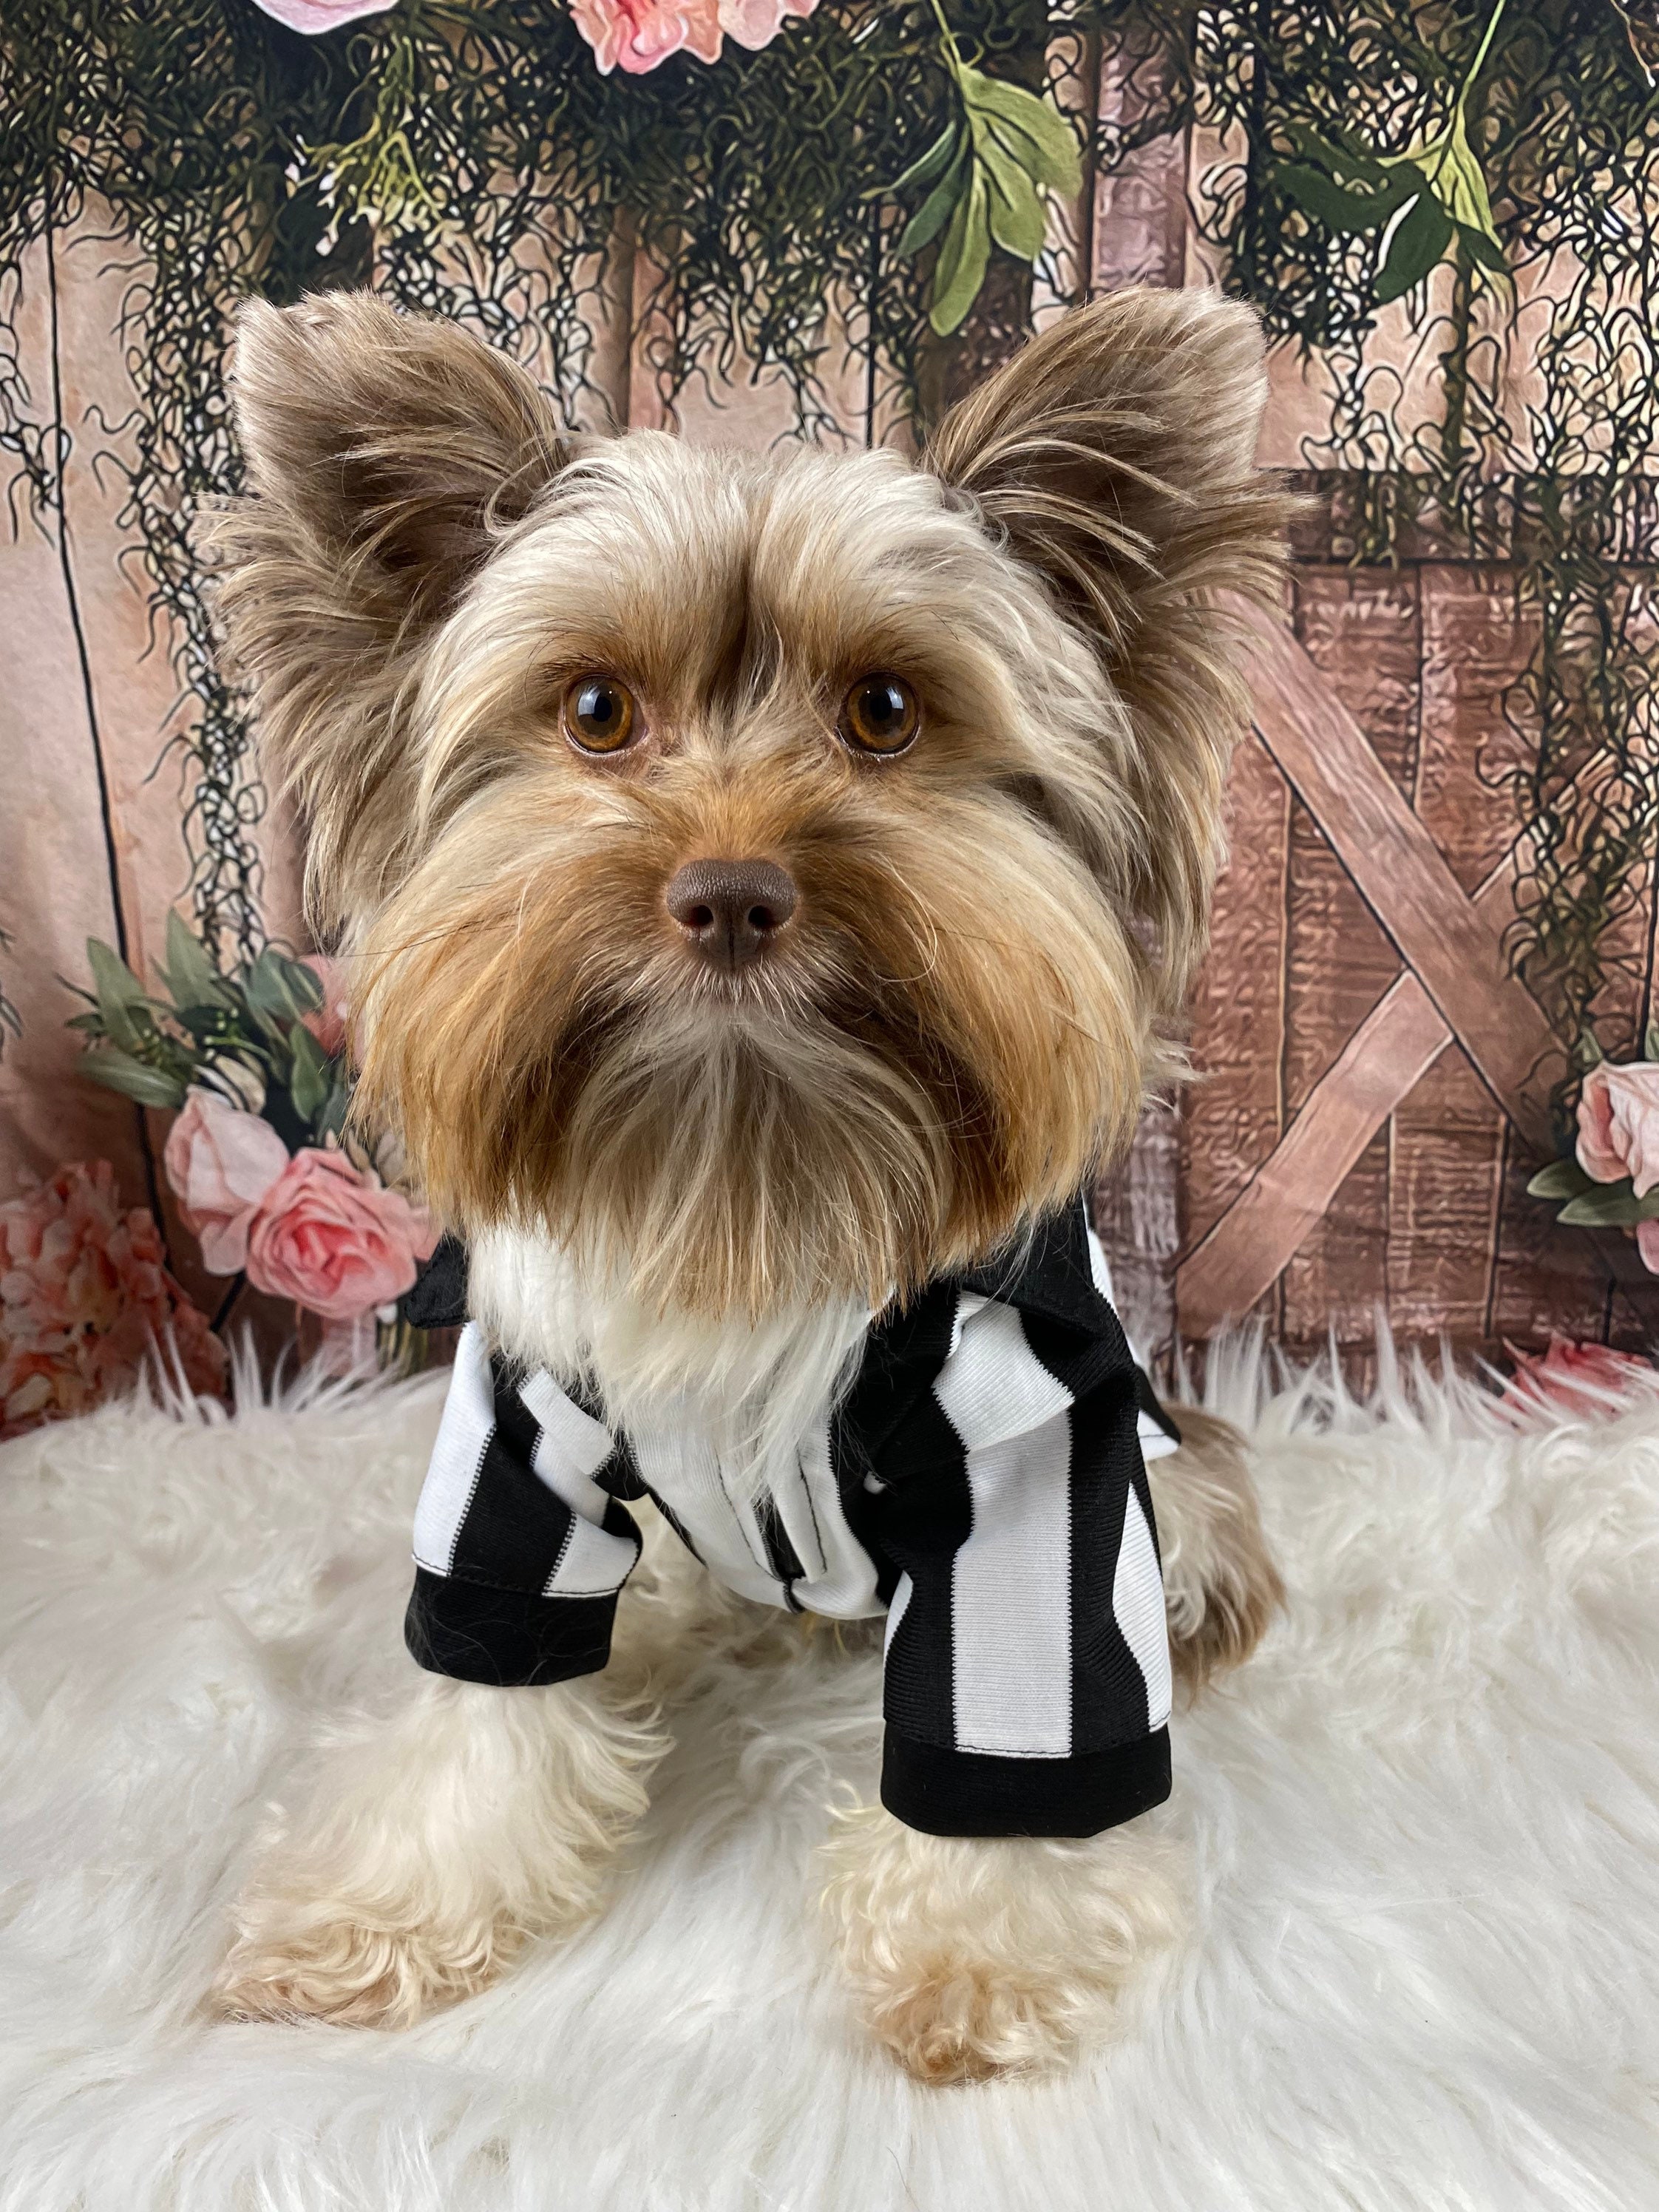 Strict Soccer Referee Dog Mascot Costume in Red Jersey Animal